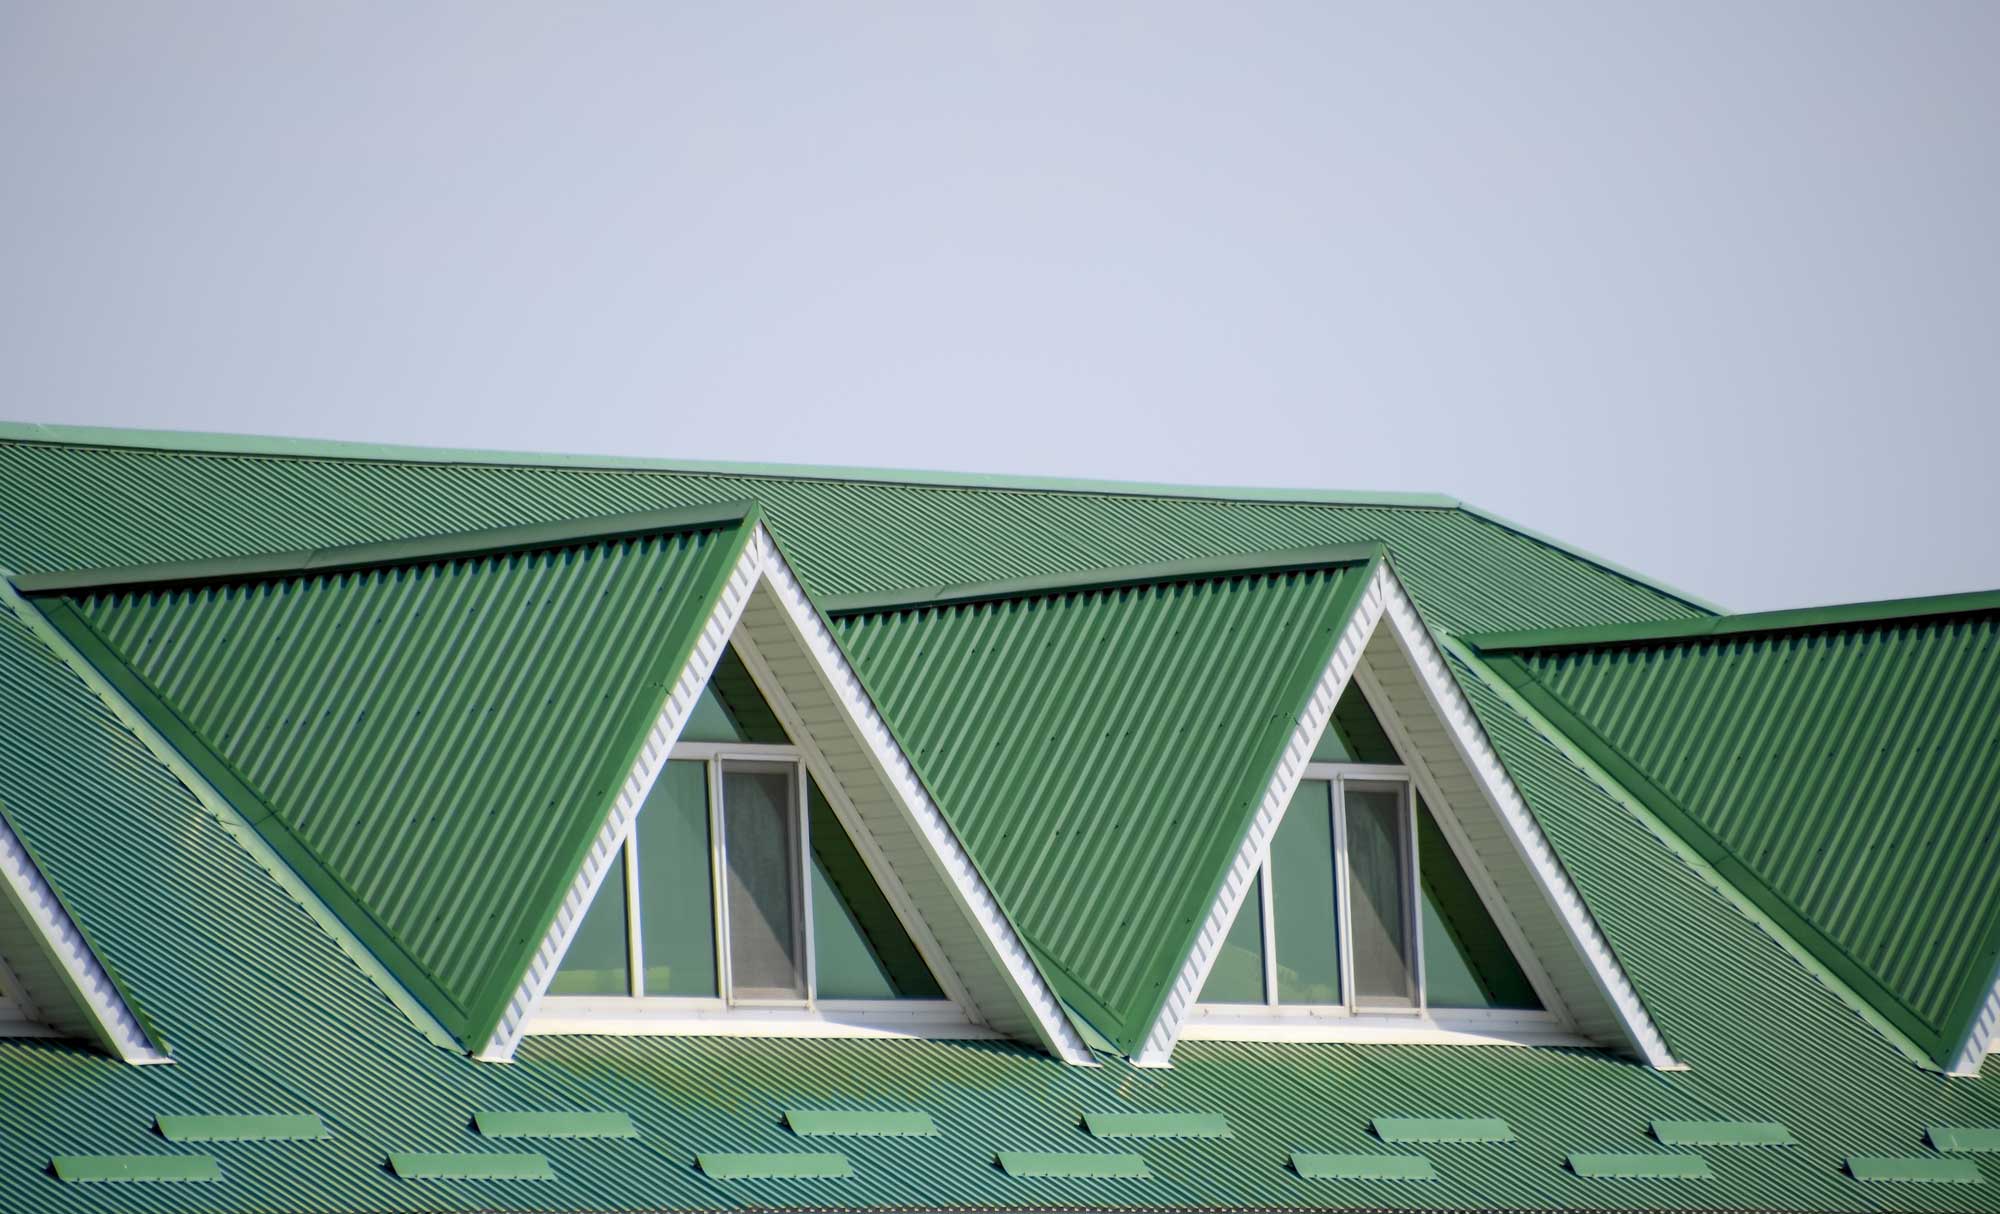 how to choose a roof, choosing a new roof